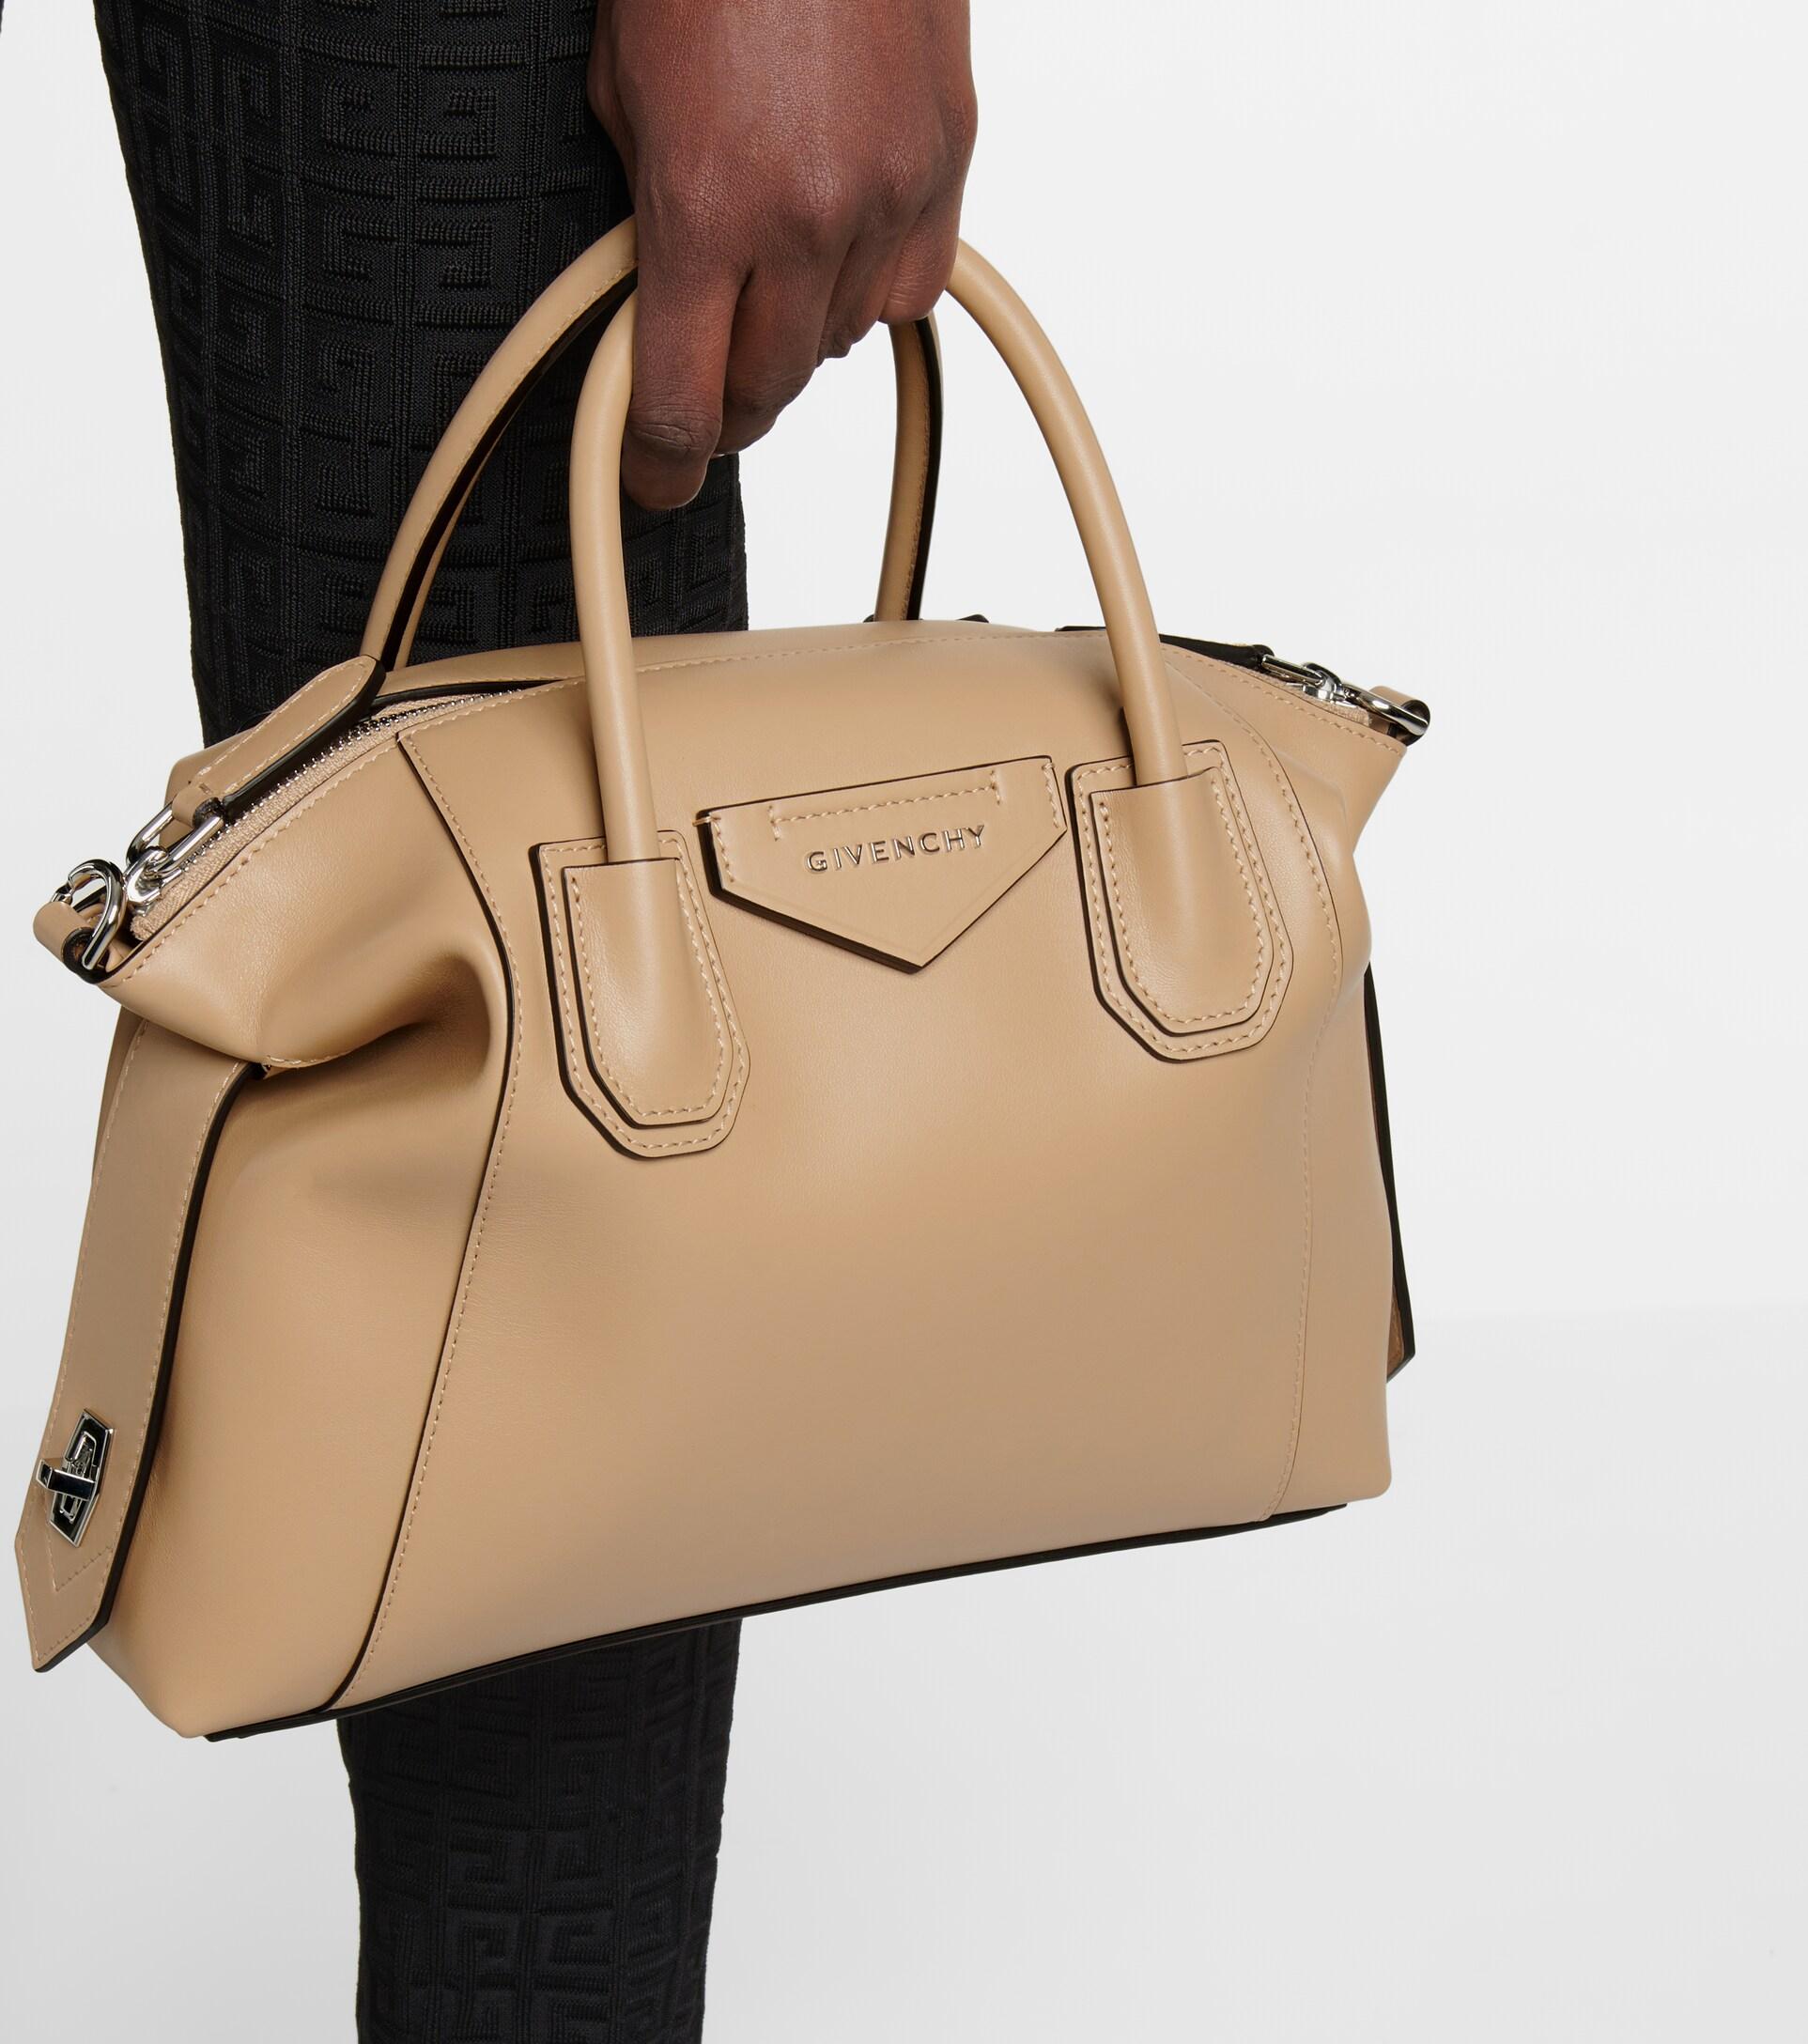 Givenchy Antigona Soft Small Leather Tote in Natural